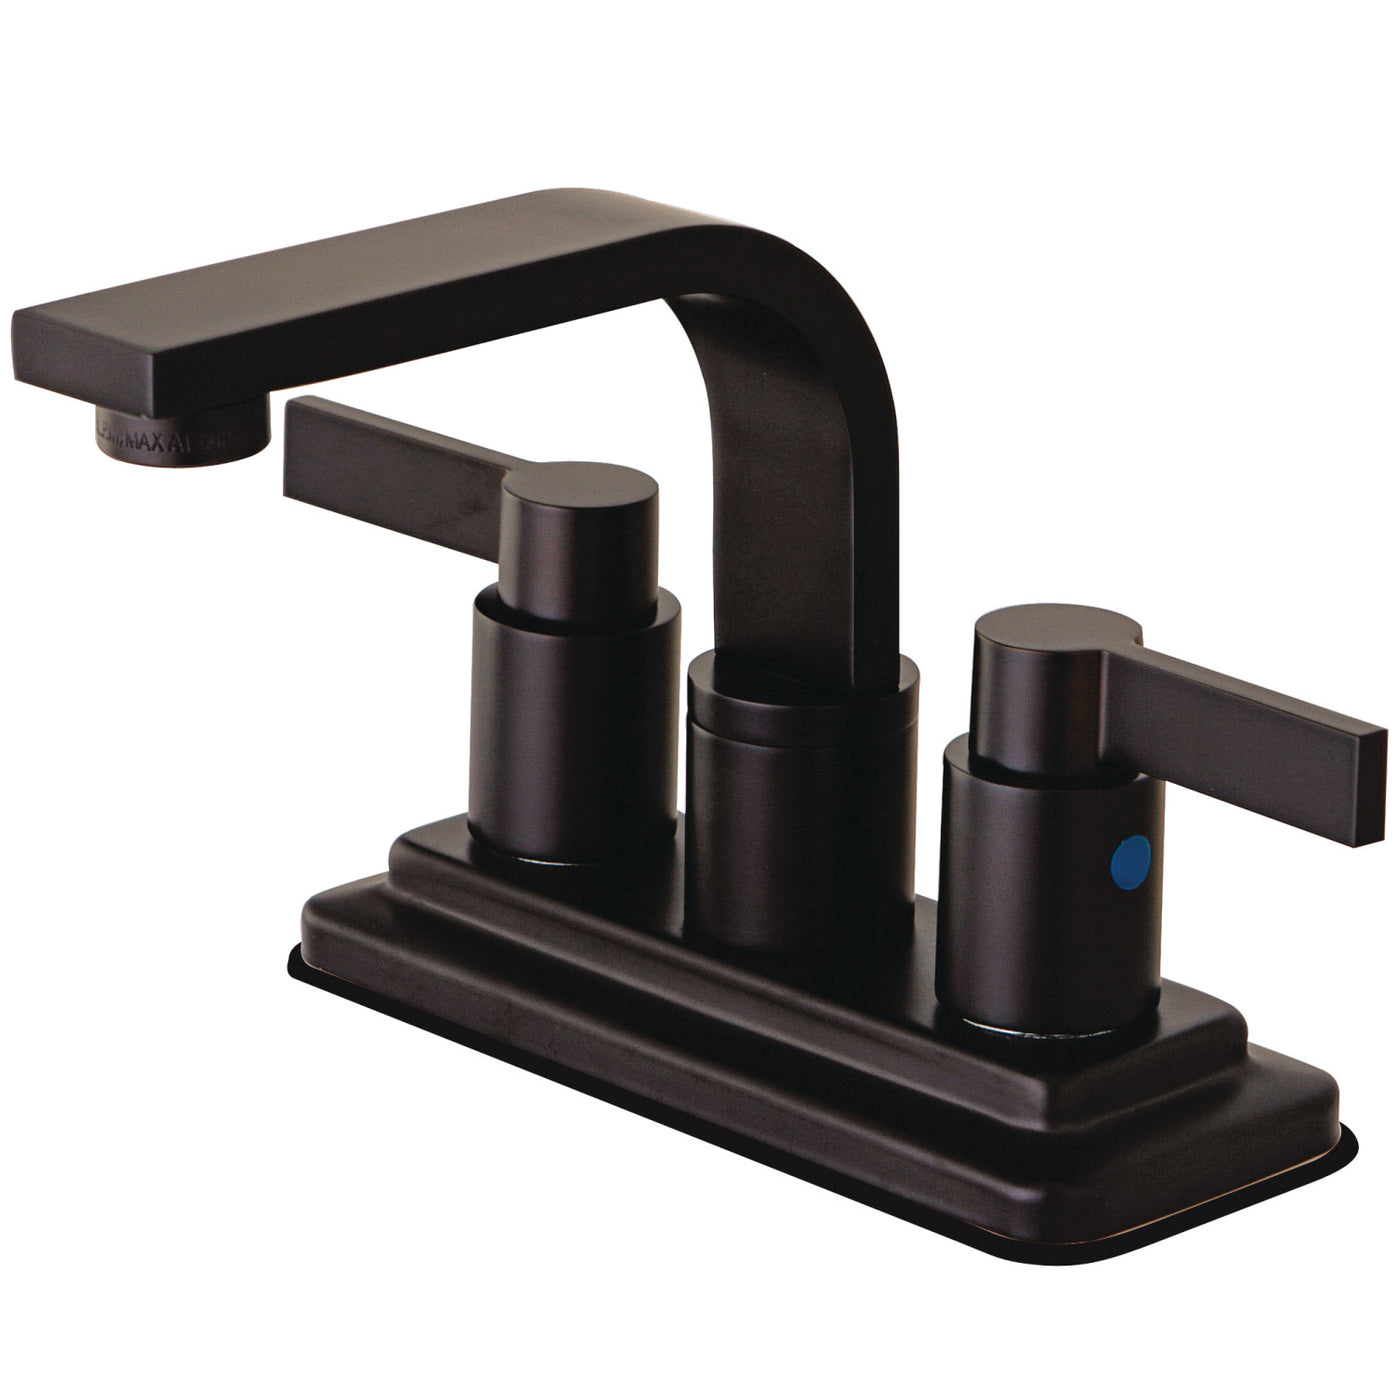 Elements of Design EB8465NDL 4-Inch Centerset Bathroom Faucet with Push Pop-Up, Oil Rubbed Bronze